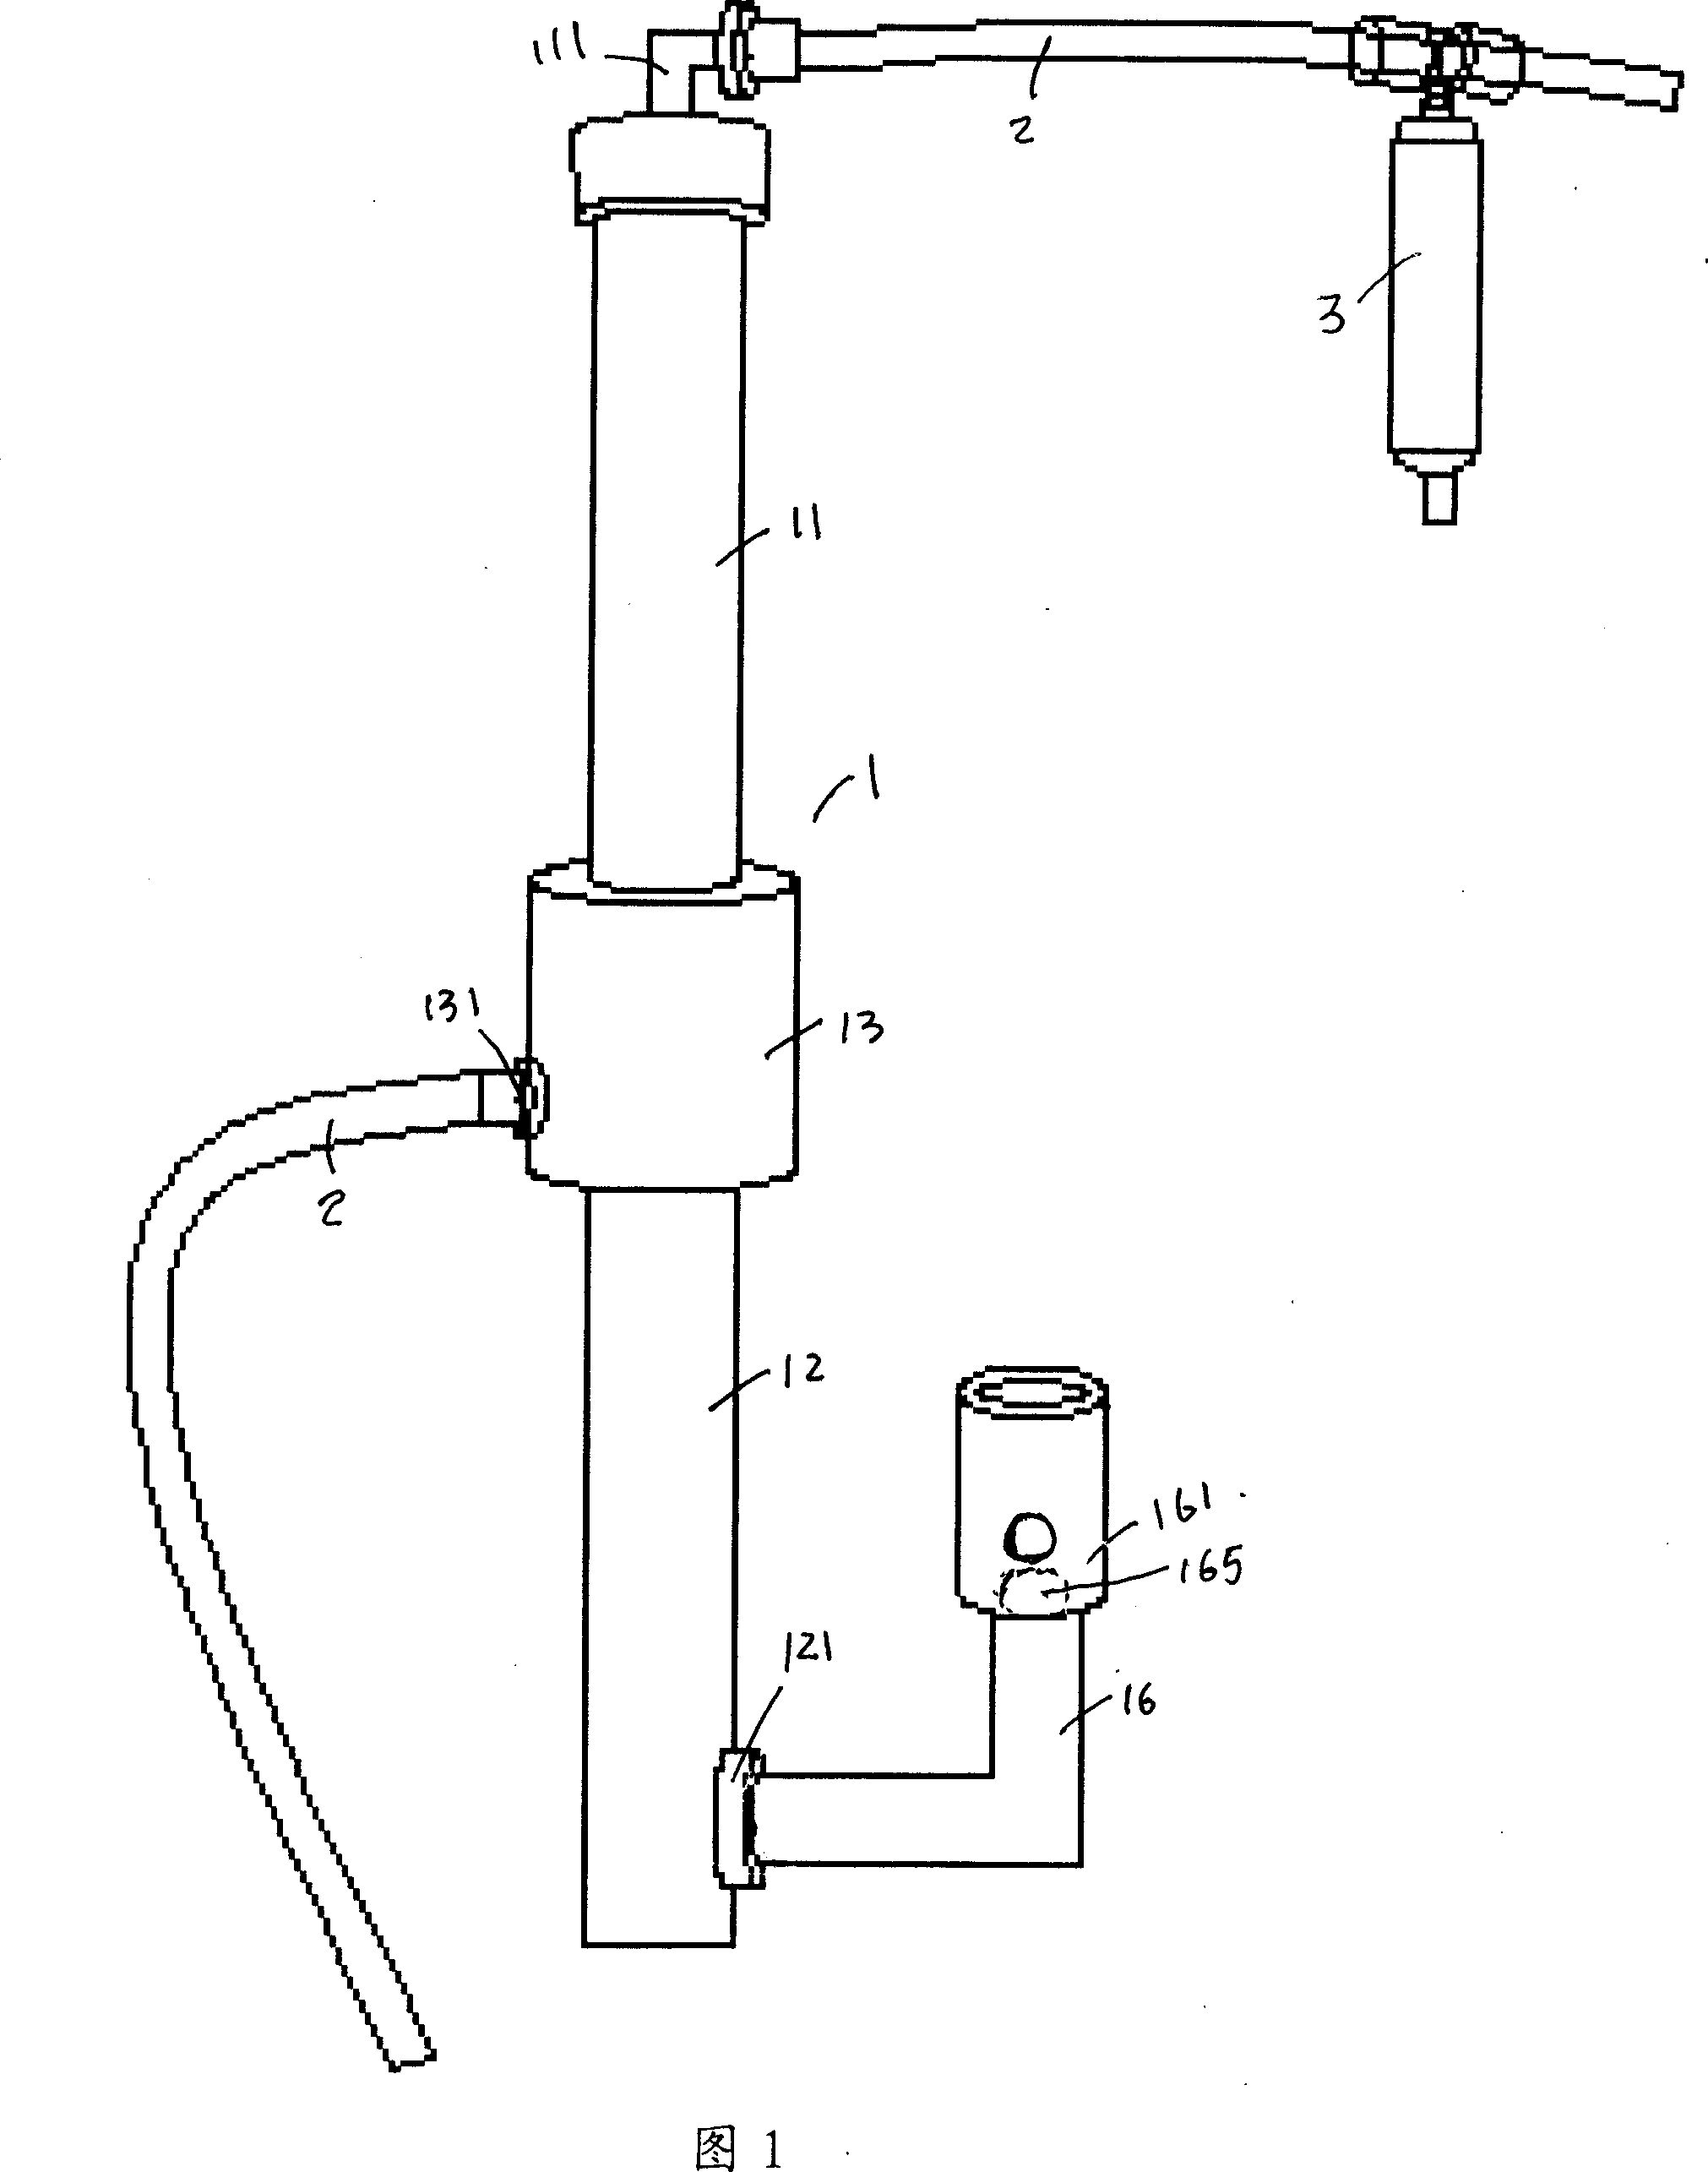 Gas pretreatment device for logging and its alarming controller